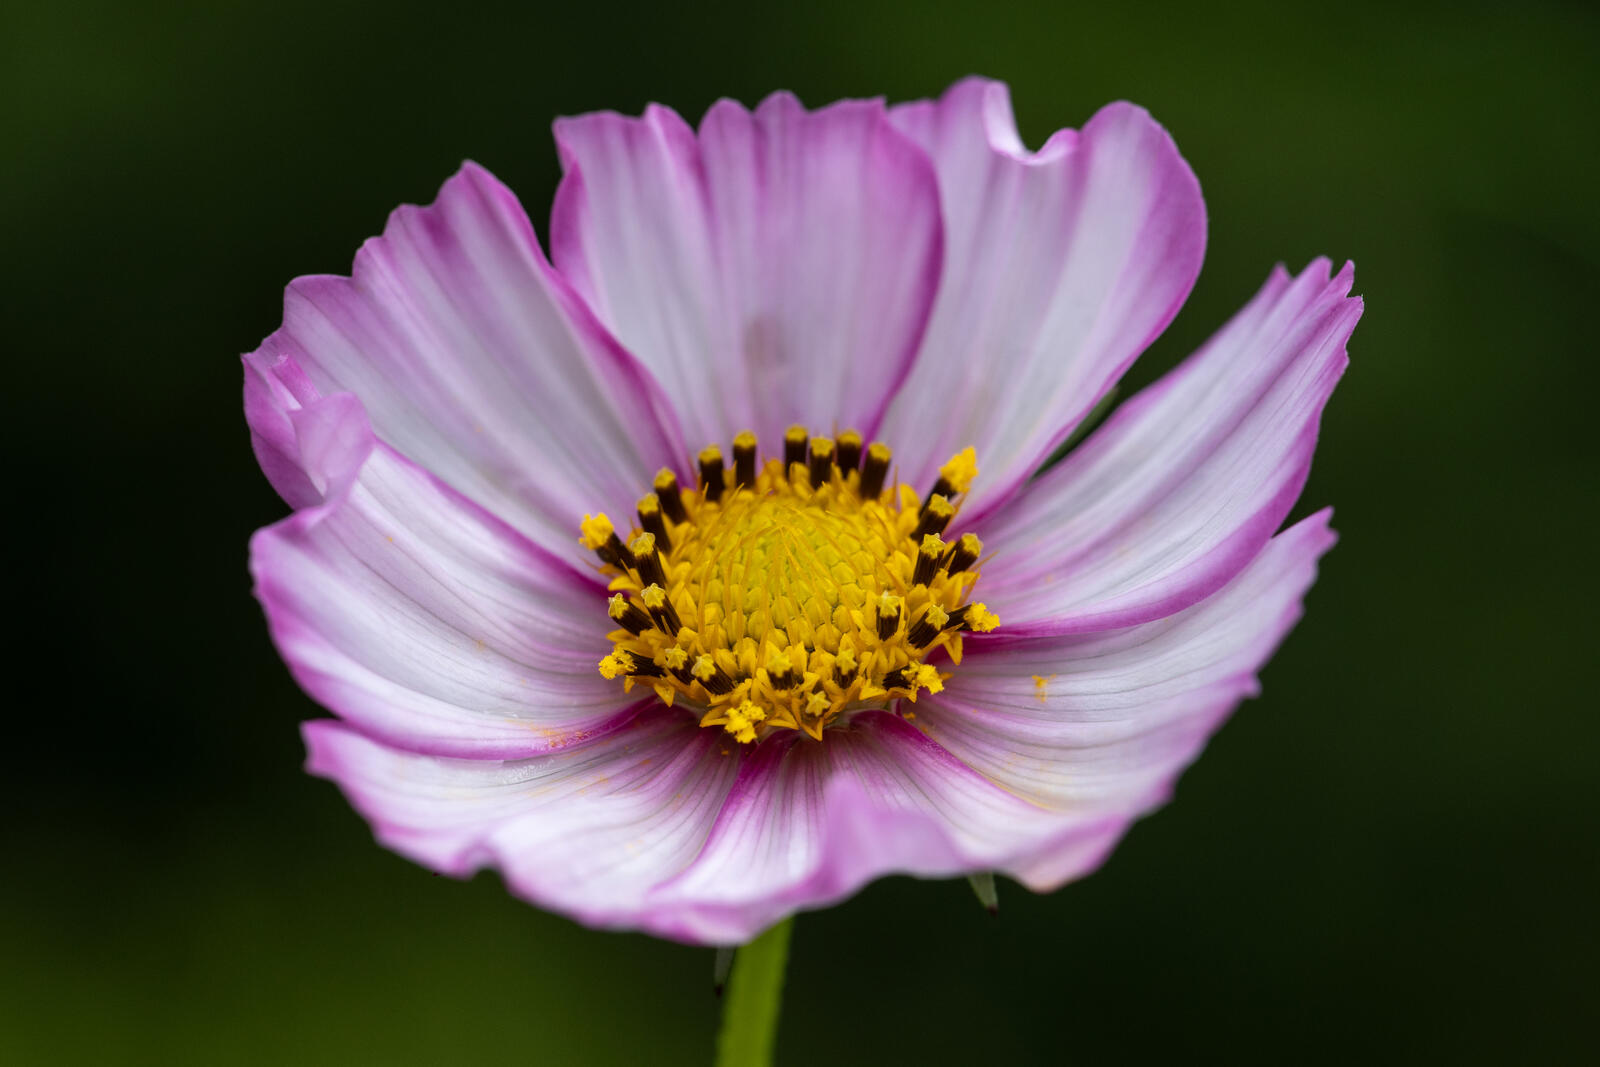 Free photo Wallpaper with a pink flower and a yellow center.